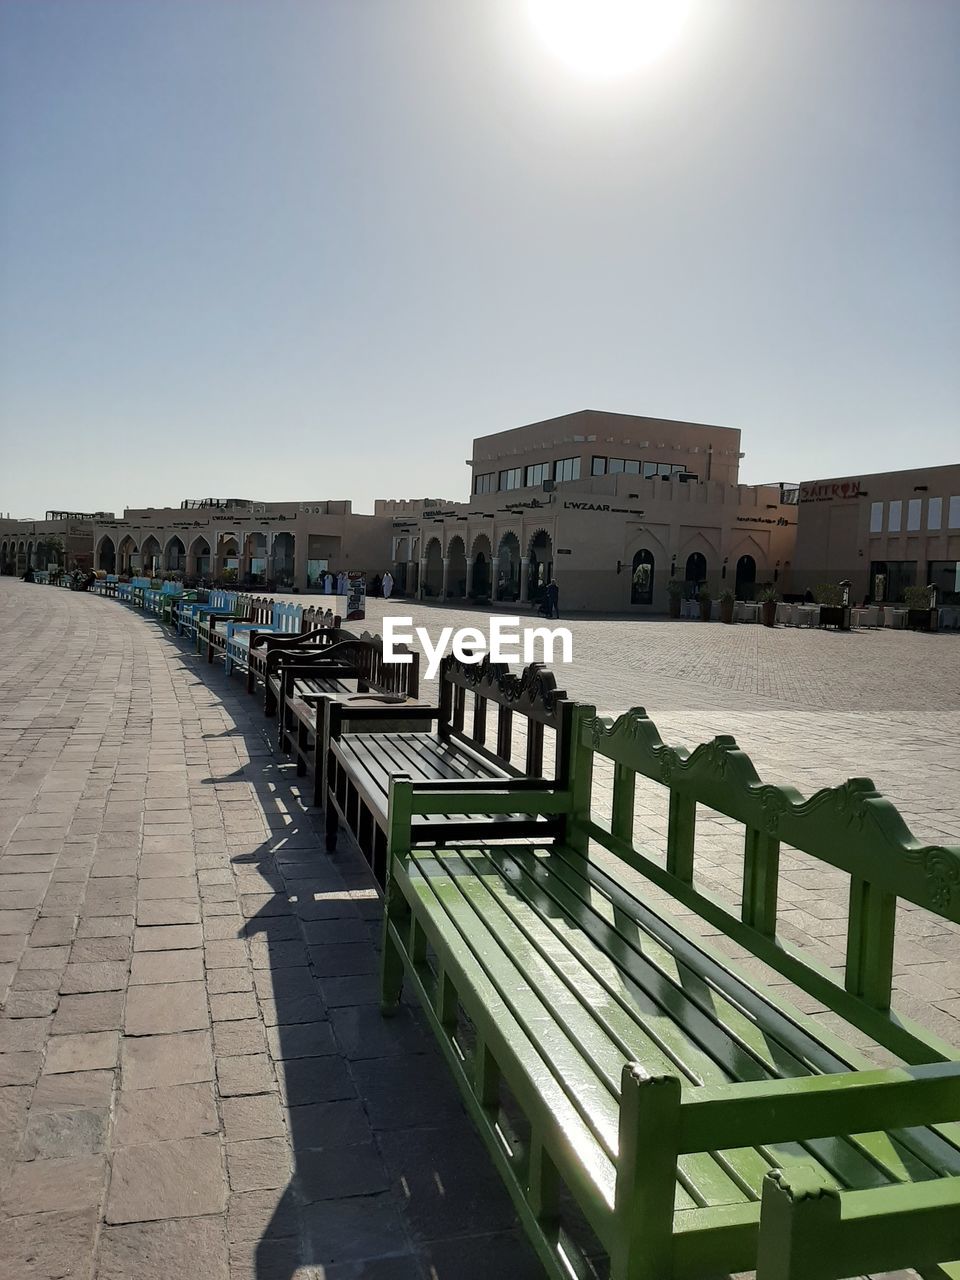 EMPTY BENCHES BY FOOTPATH AGAINST BUILDINGS IN CITY